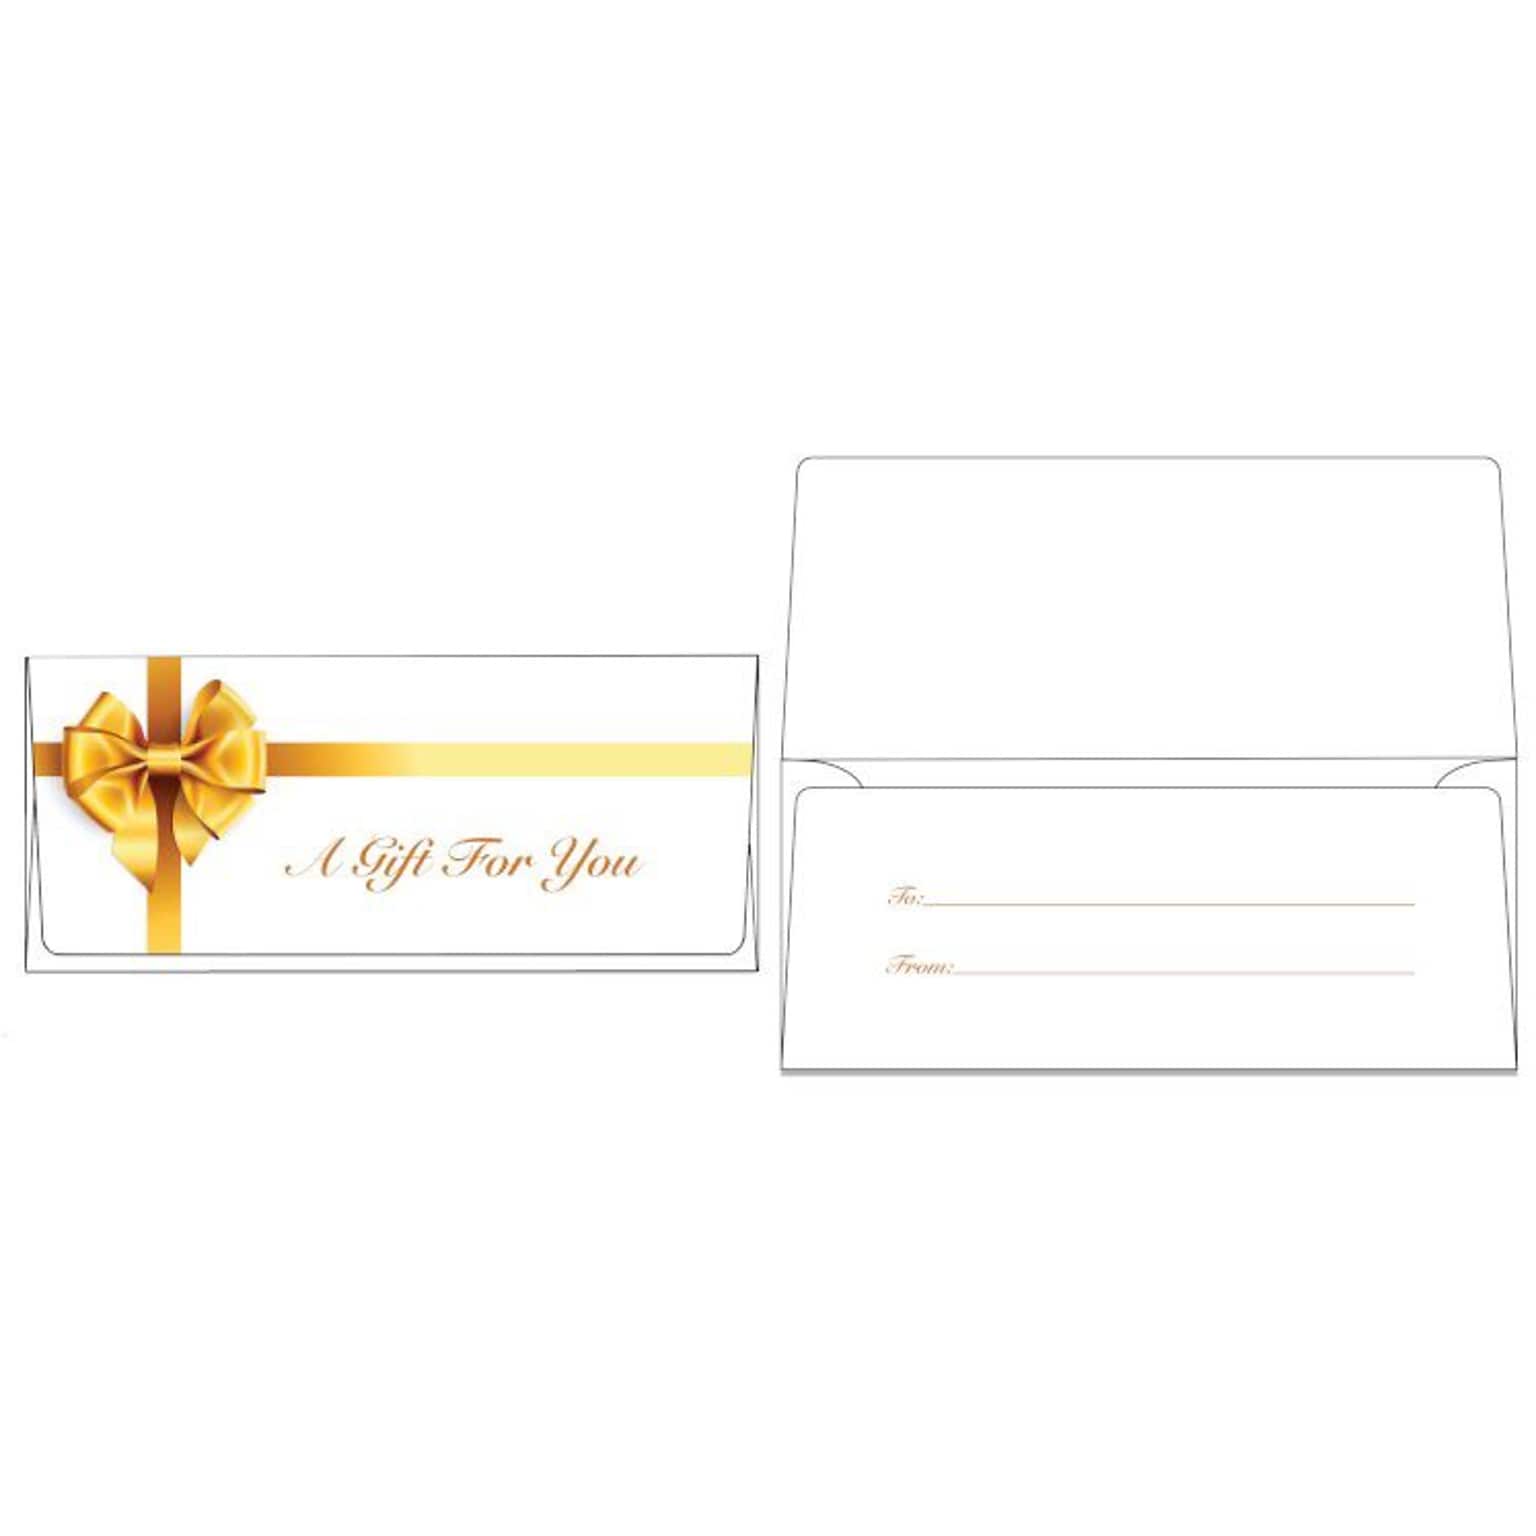 LUX Square Flap Open End Currency Envelope, 2 7/8 x 6 1/2, Gold Bow, 1000/Box (CUR-99-1000)